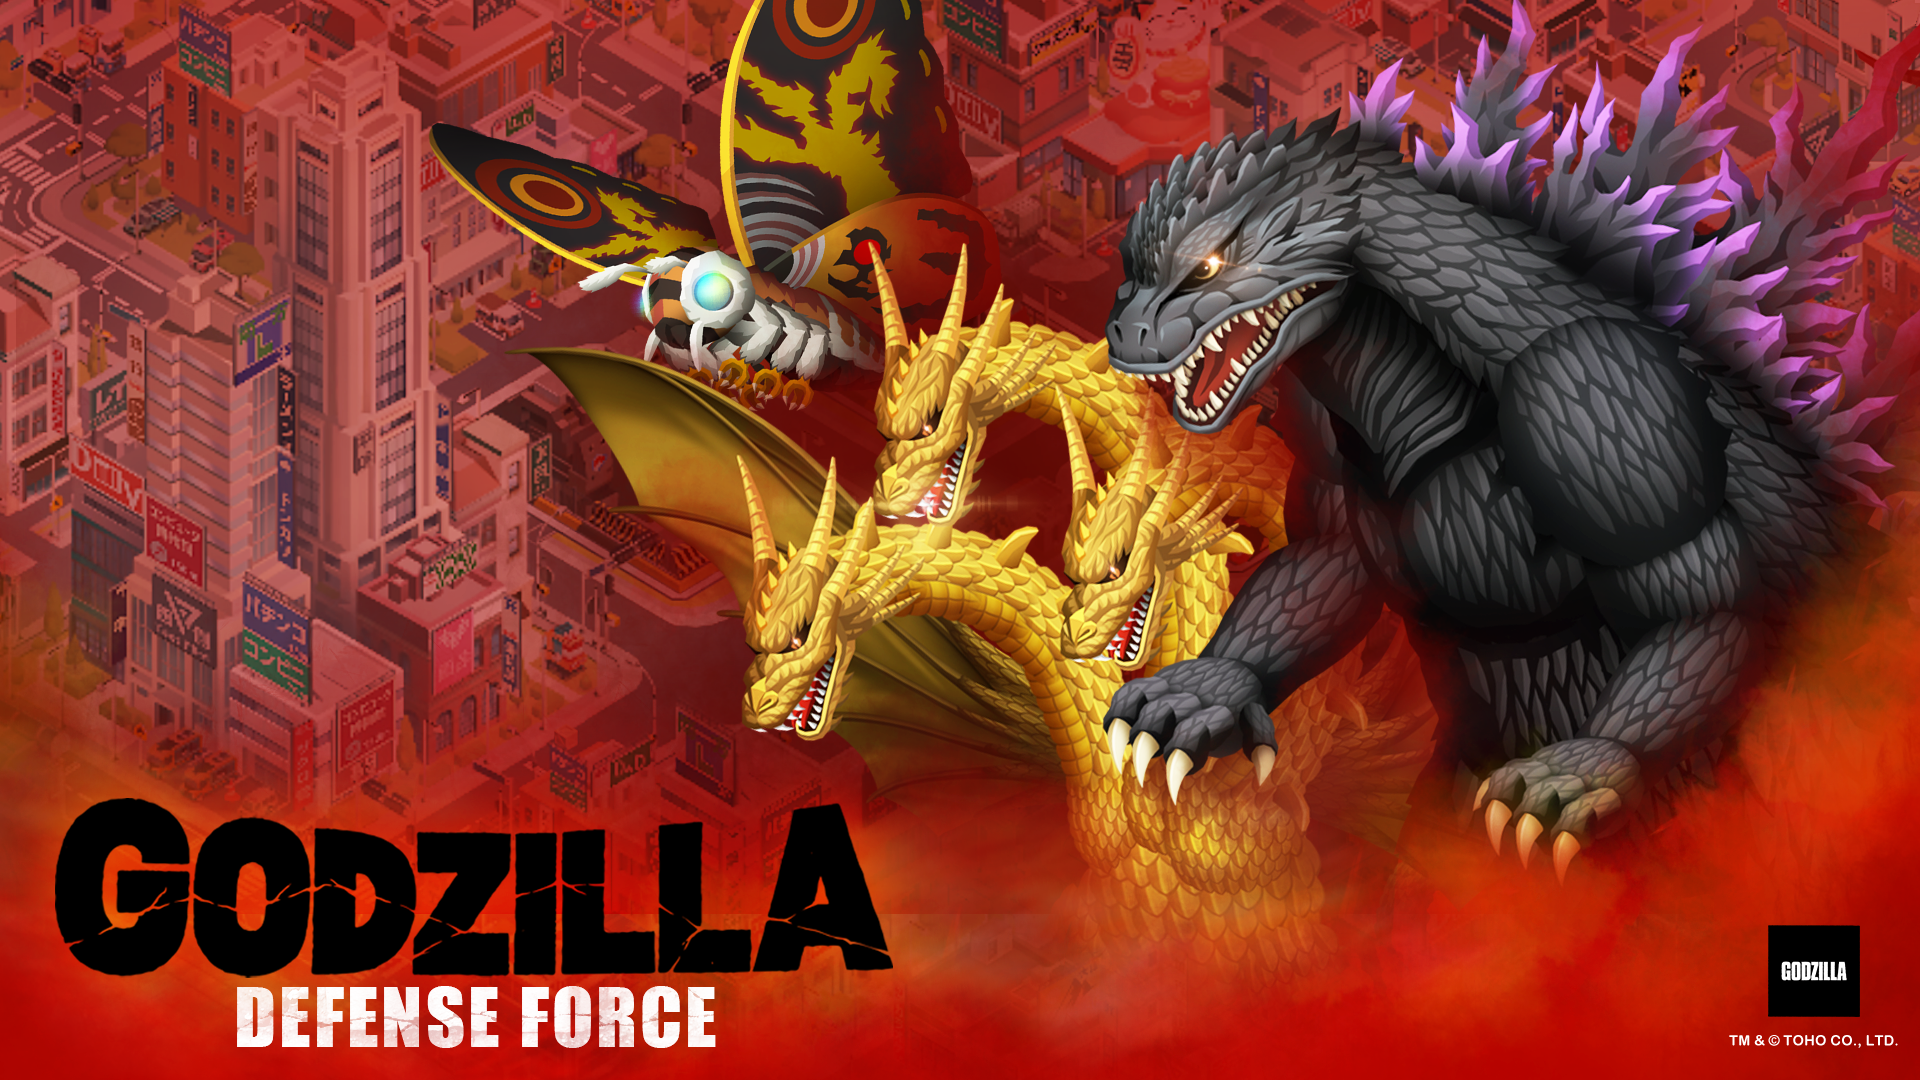 Godzilla Defense Force Now Available on Mobile Devices Worldwide